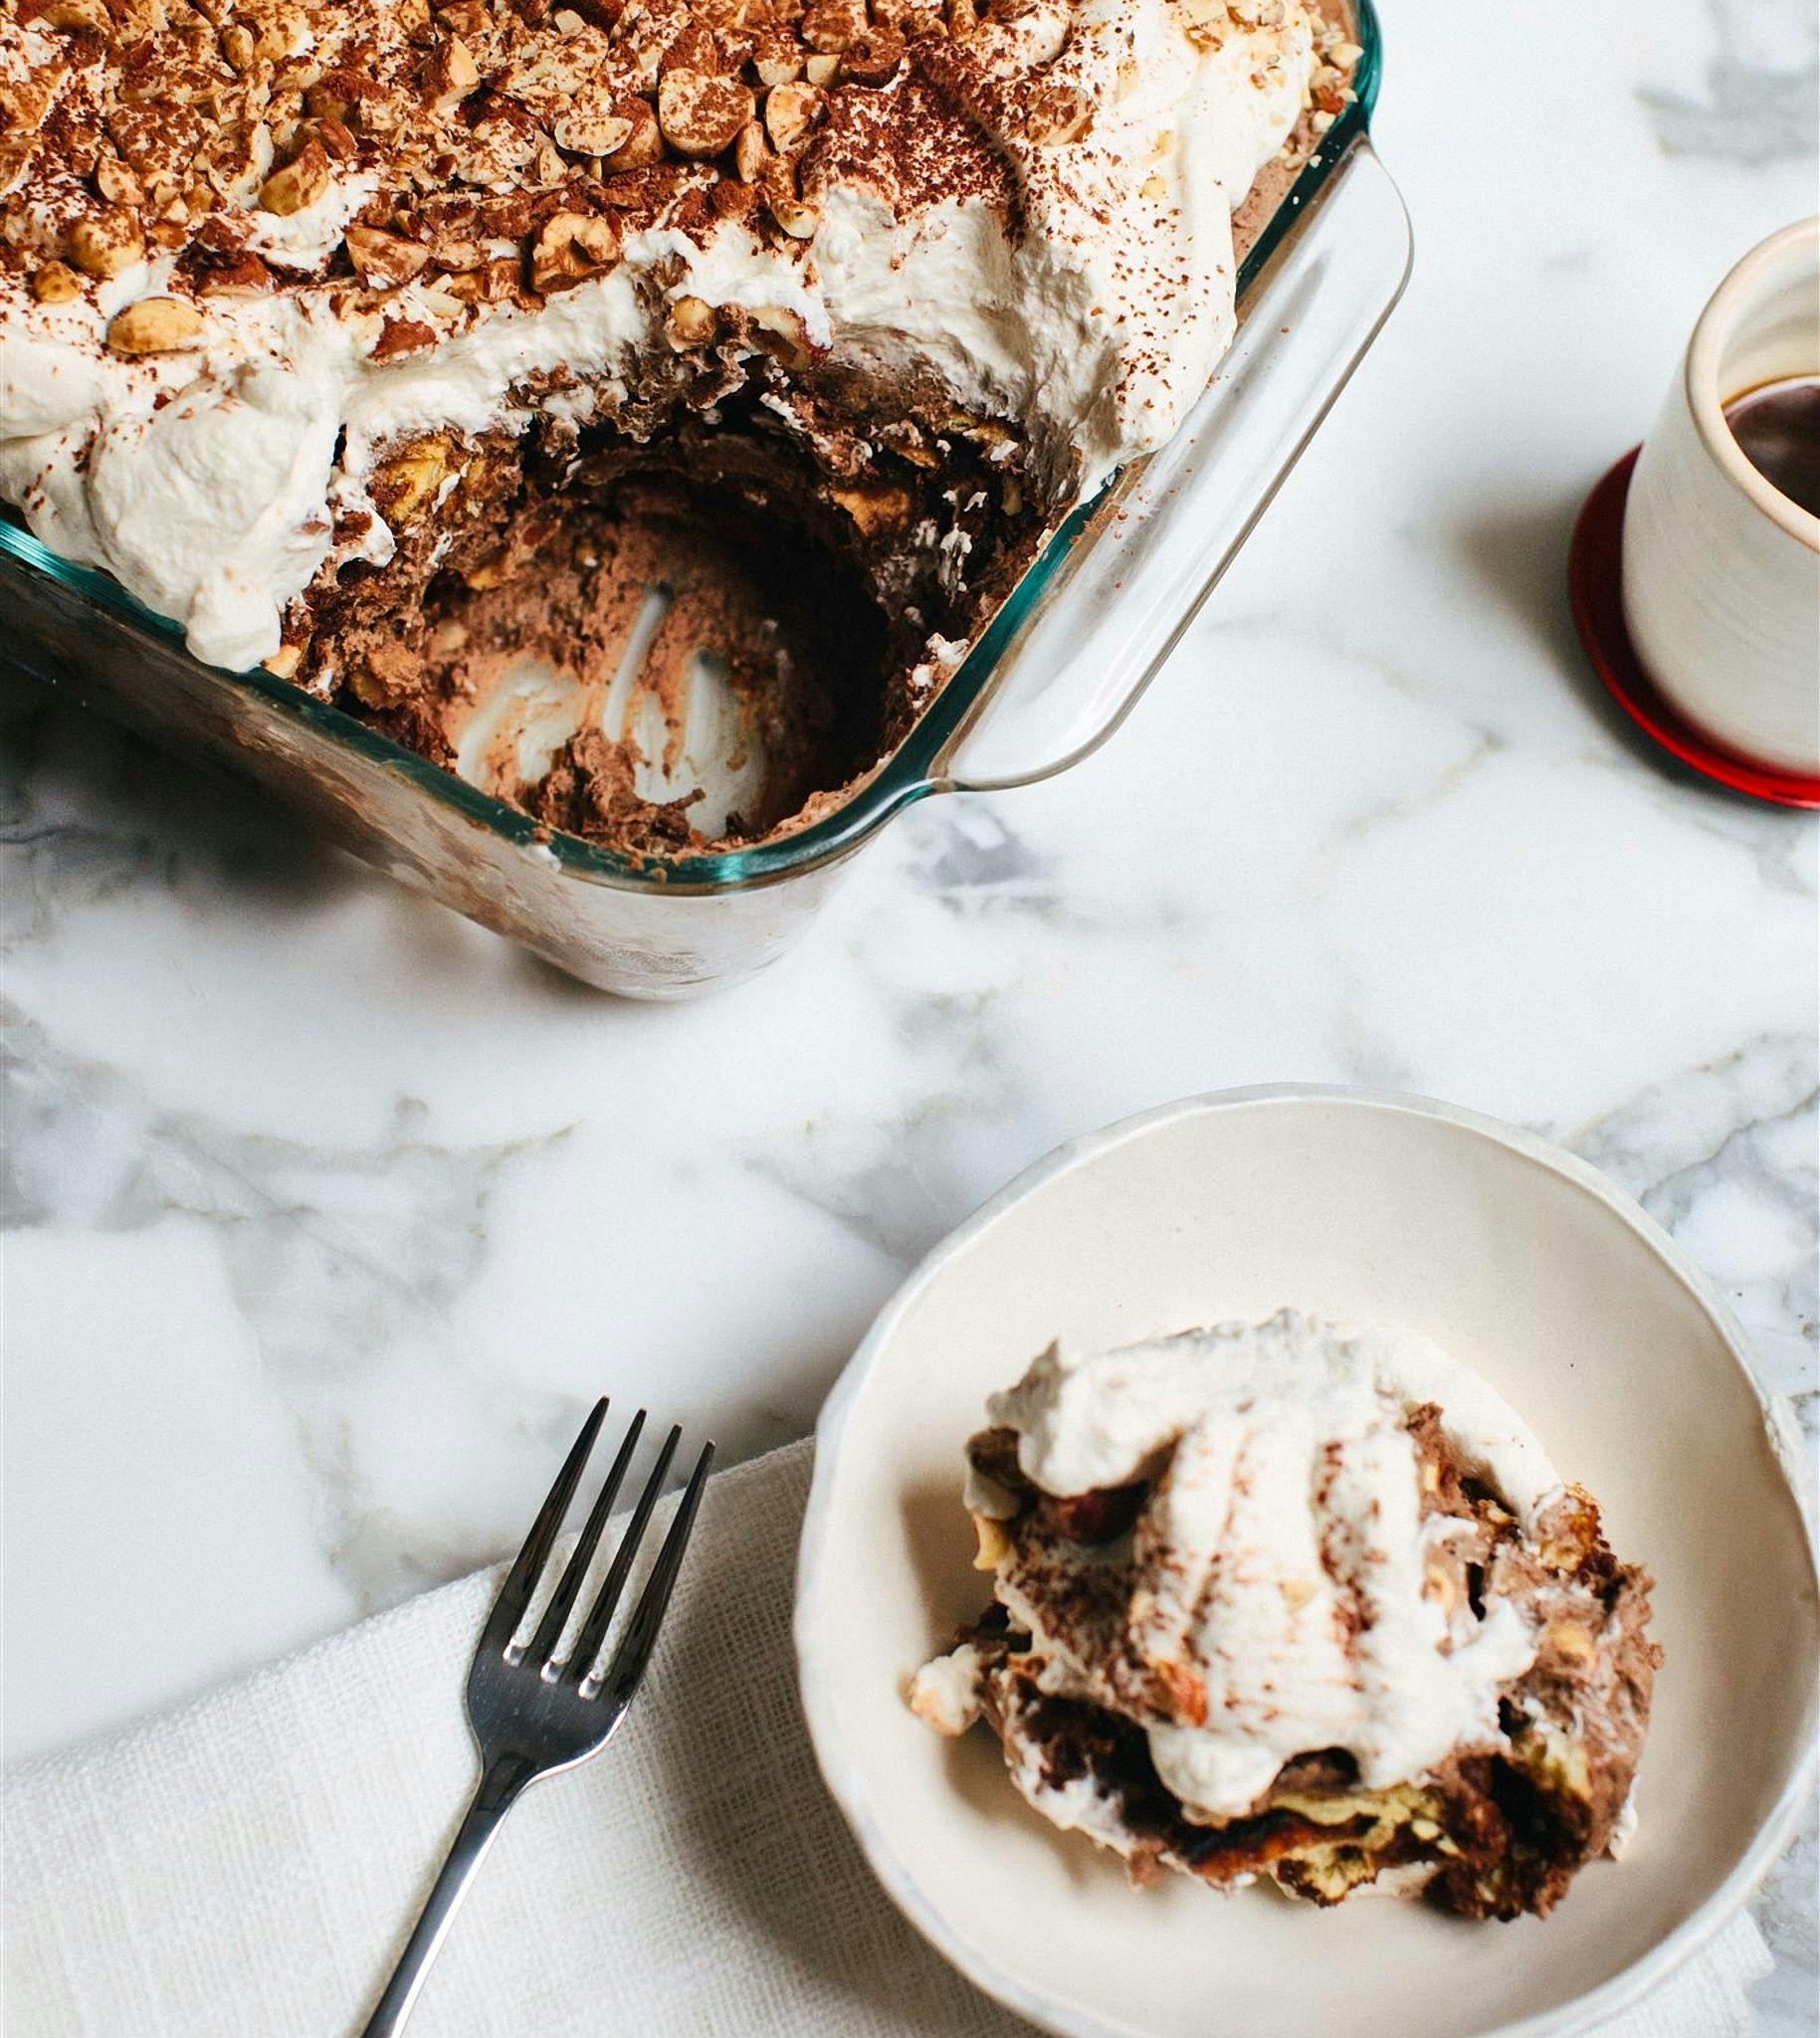 Serving dish of Coffee Hazelnut Trifle and one plate served with a fork